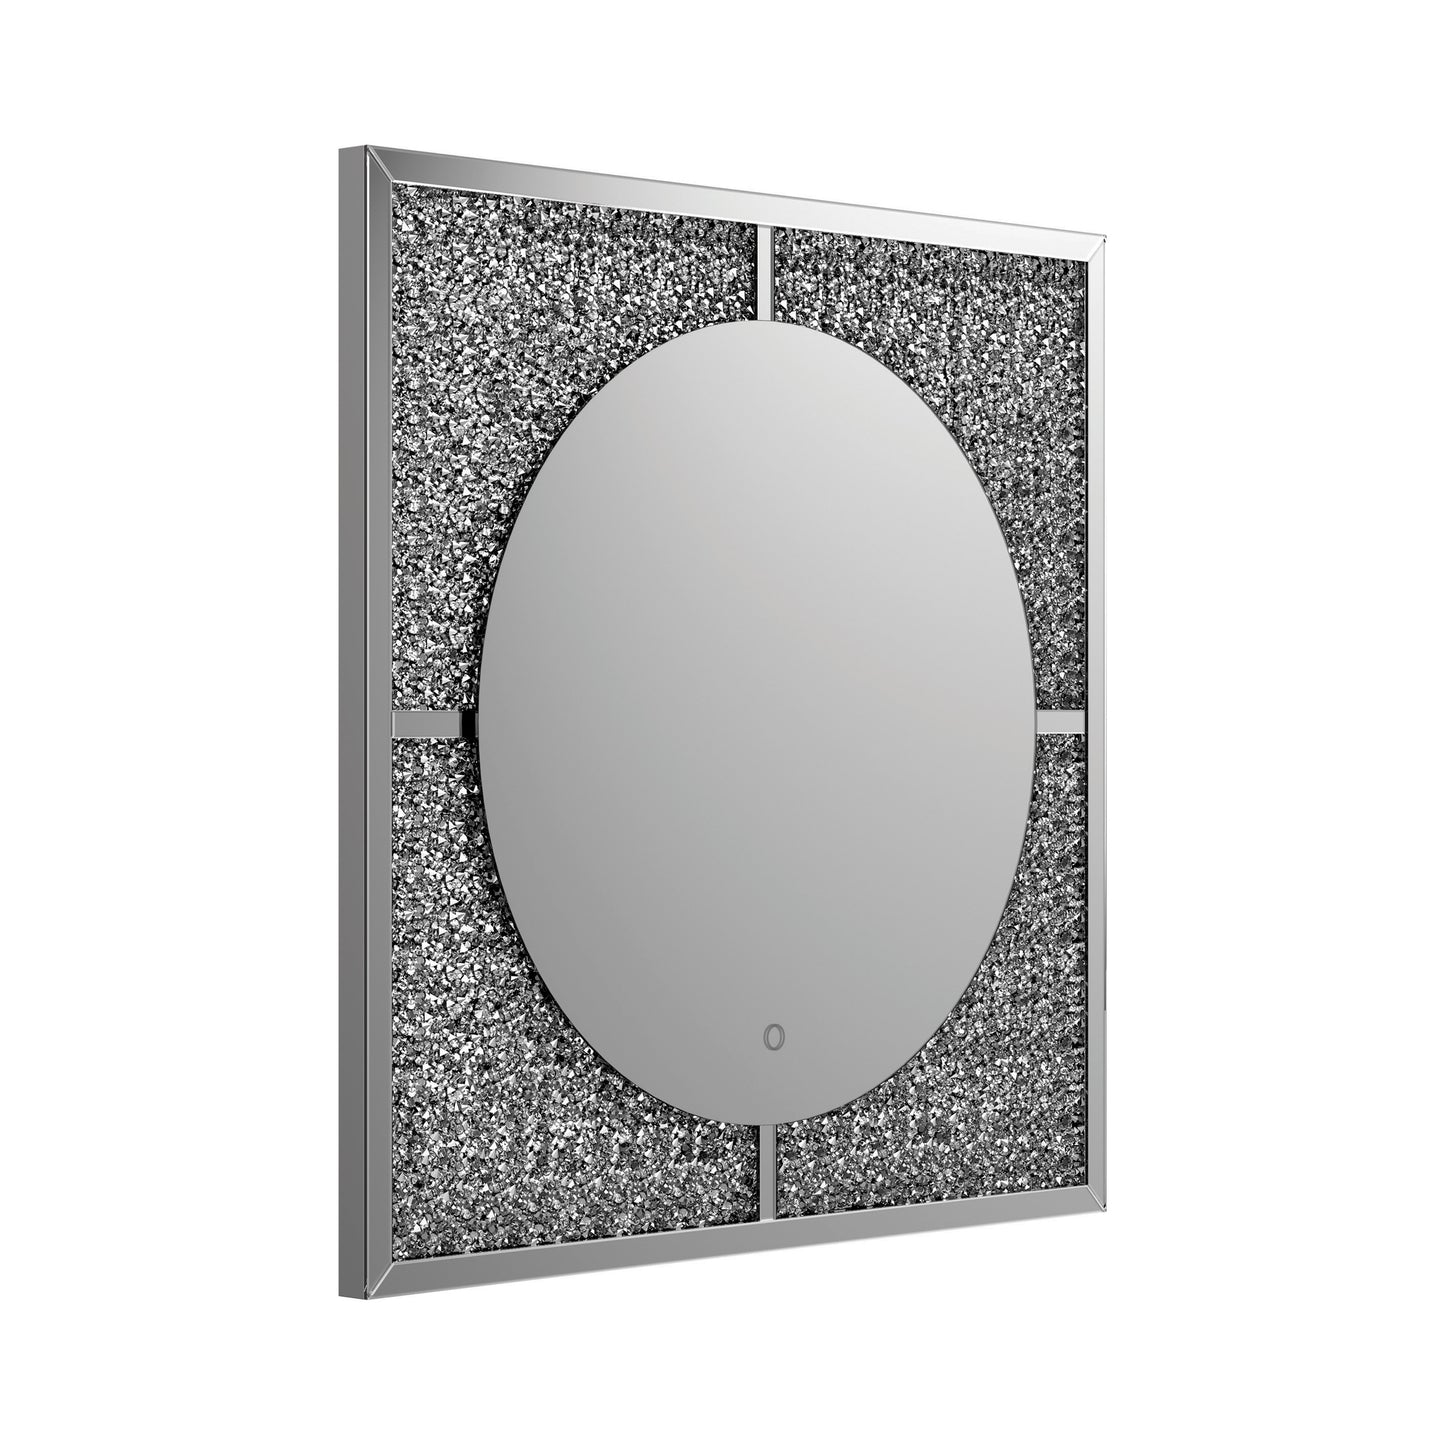 LED Wall Mirror Silver And Black - 961554